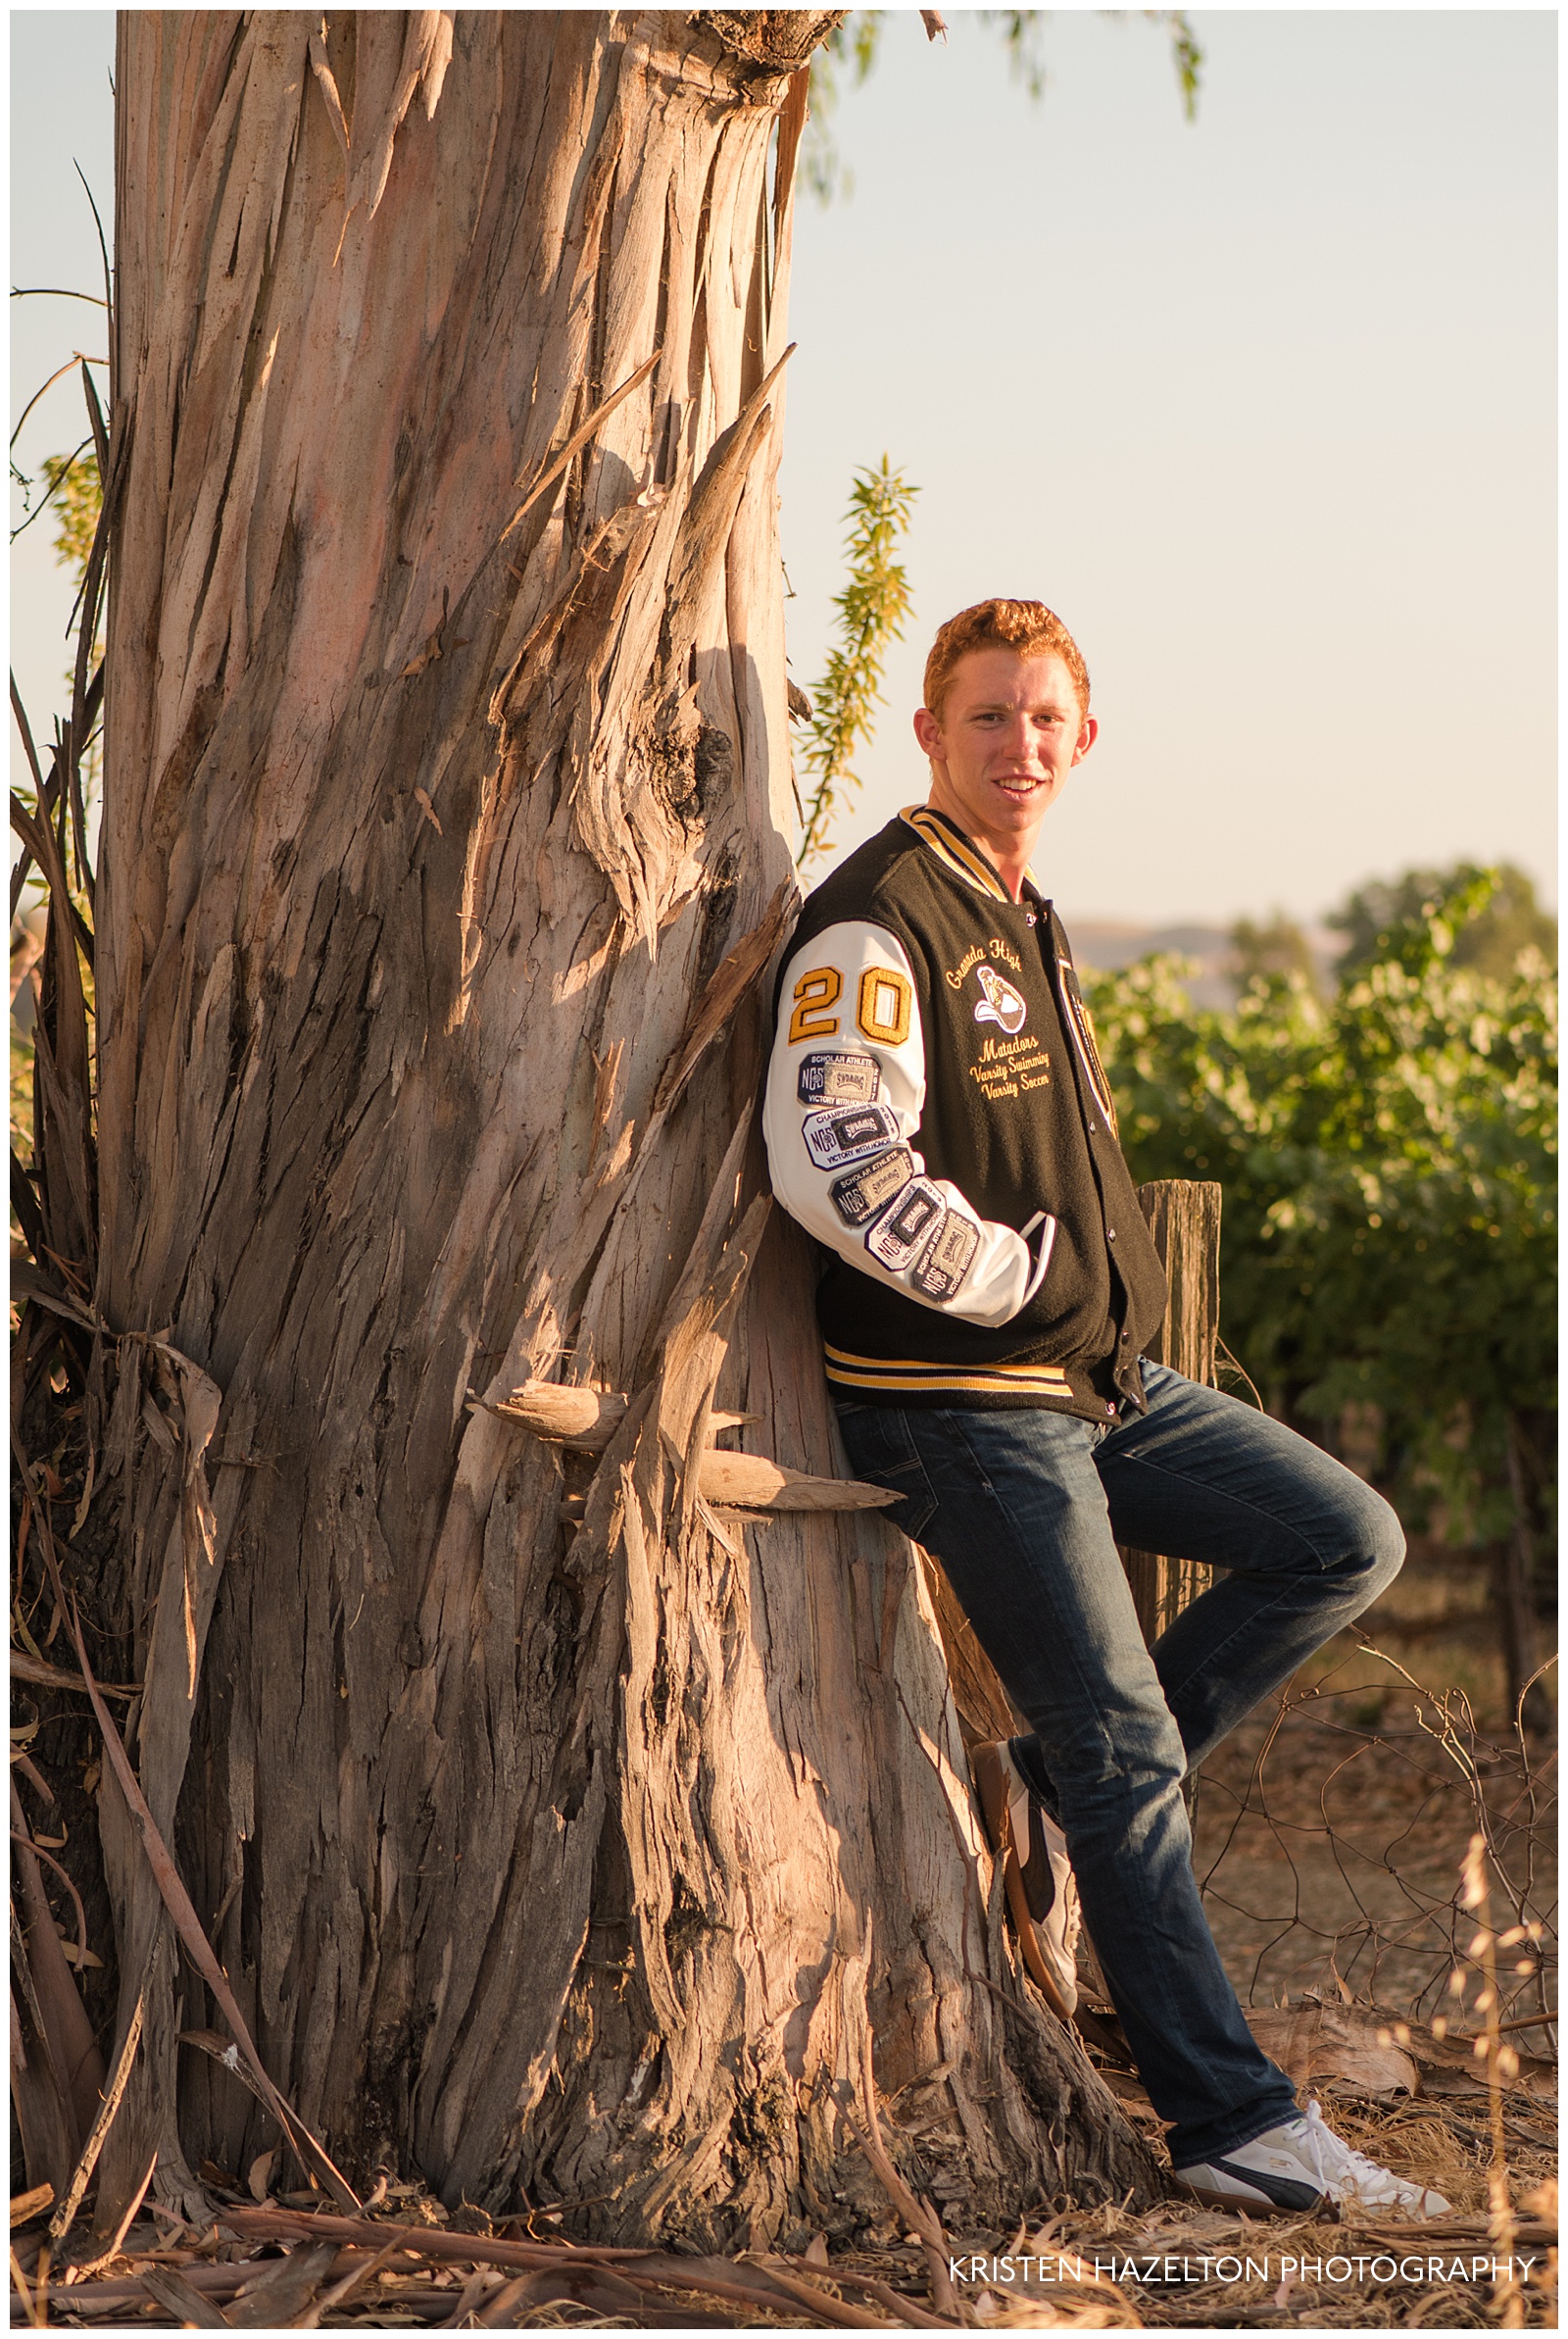 Livermore senior photos of a teen wearing a varsity jacket leaning against a tree